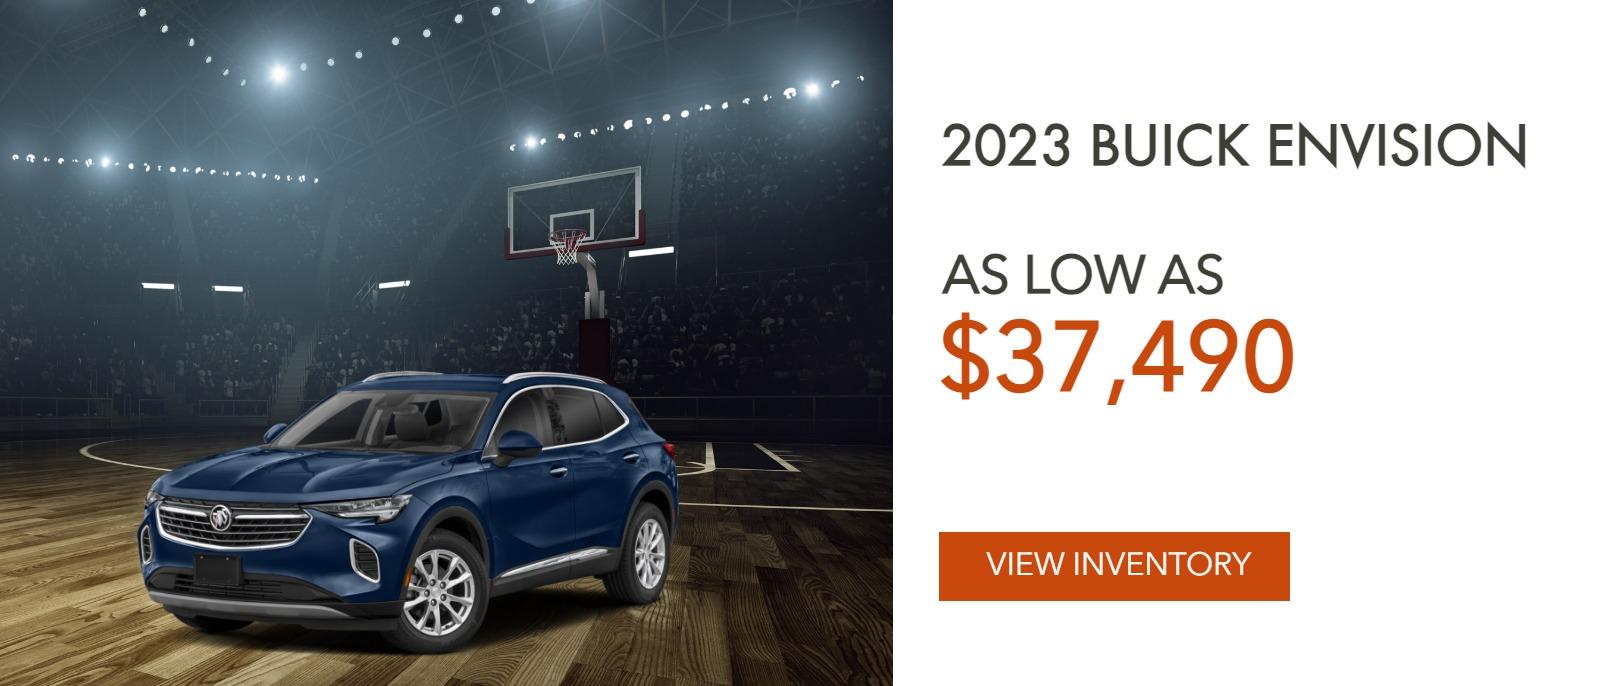 2023 Buick Envision as low as $37,490